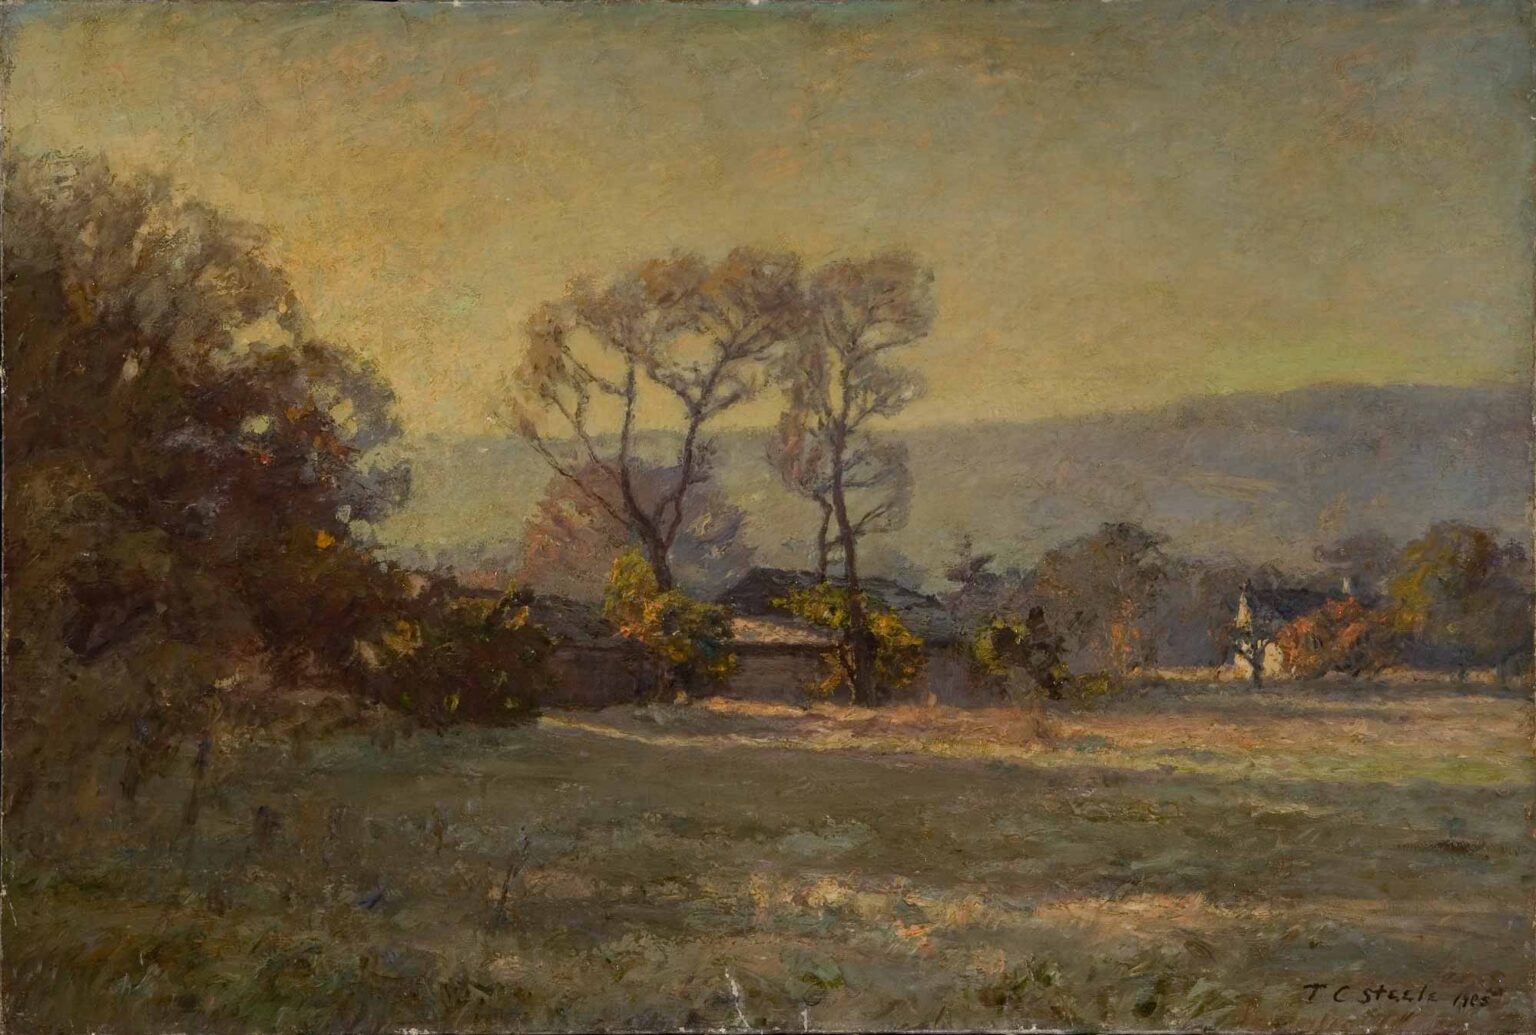 oil on canvas in yellow-green and brown hues of small buildings amongst leafless trees